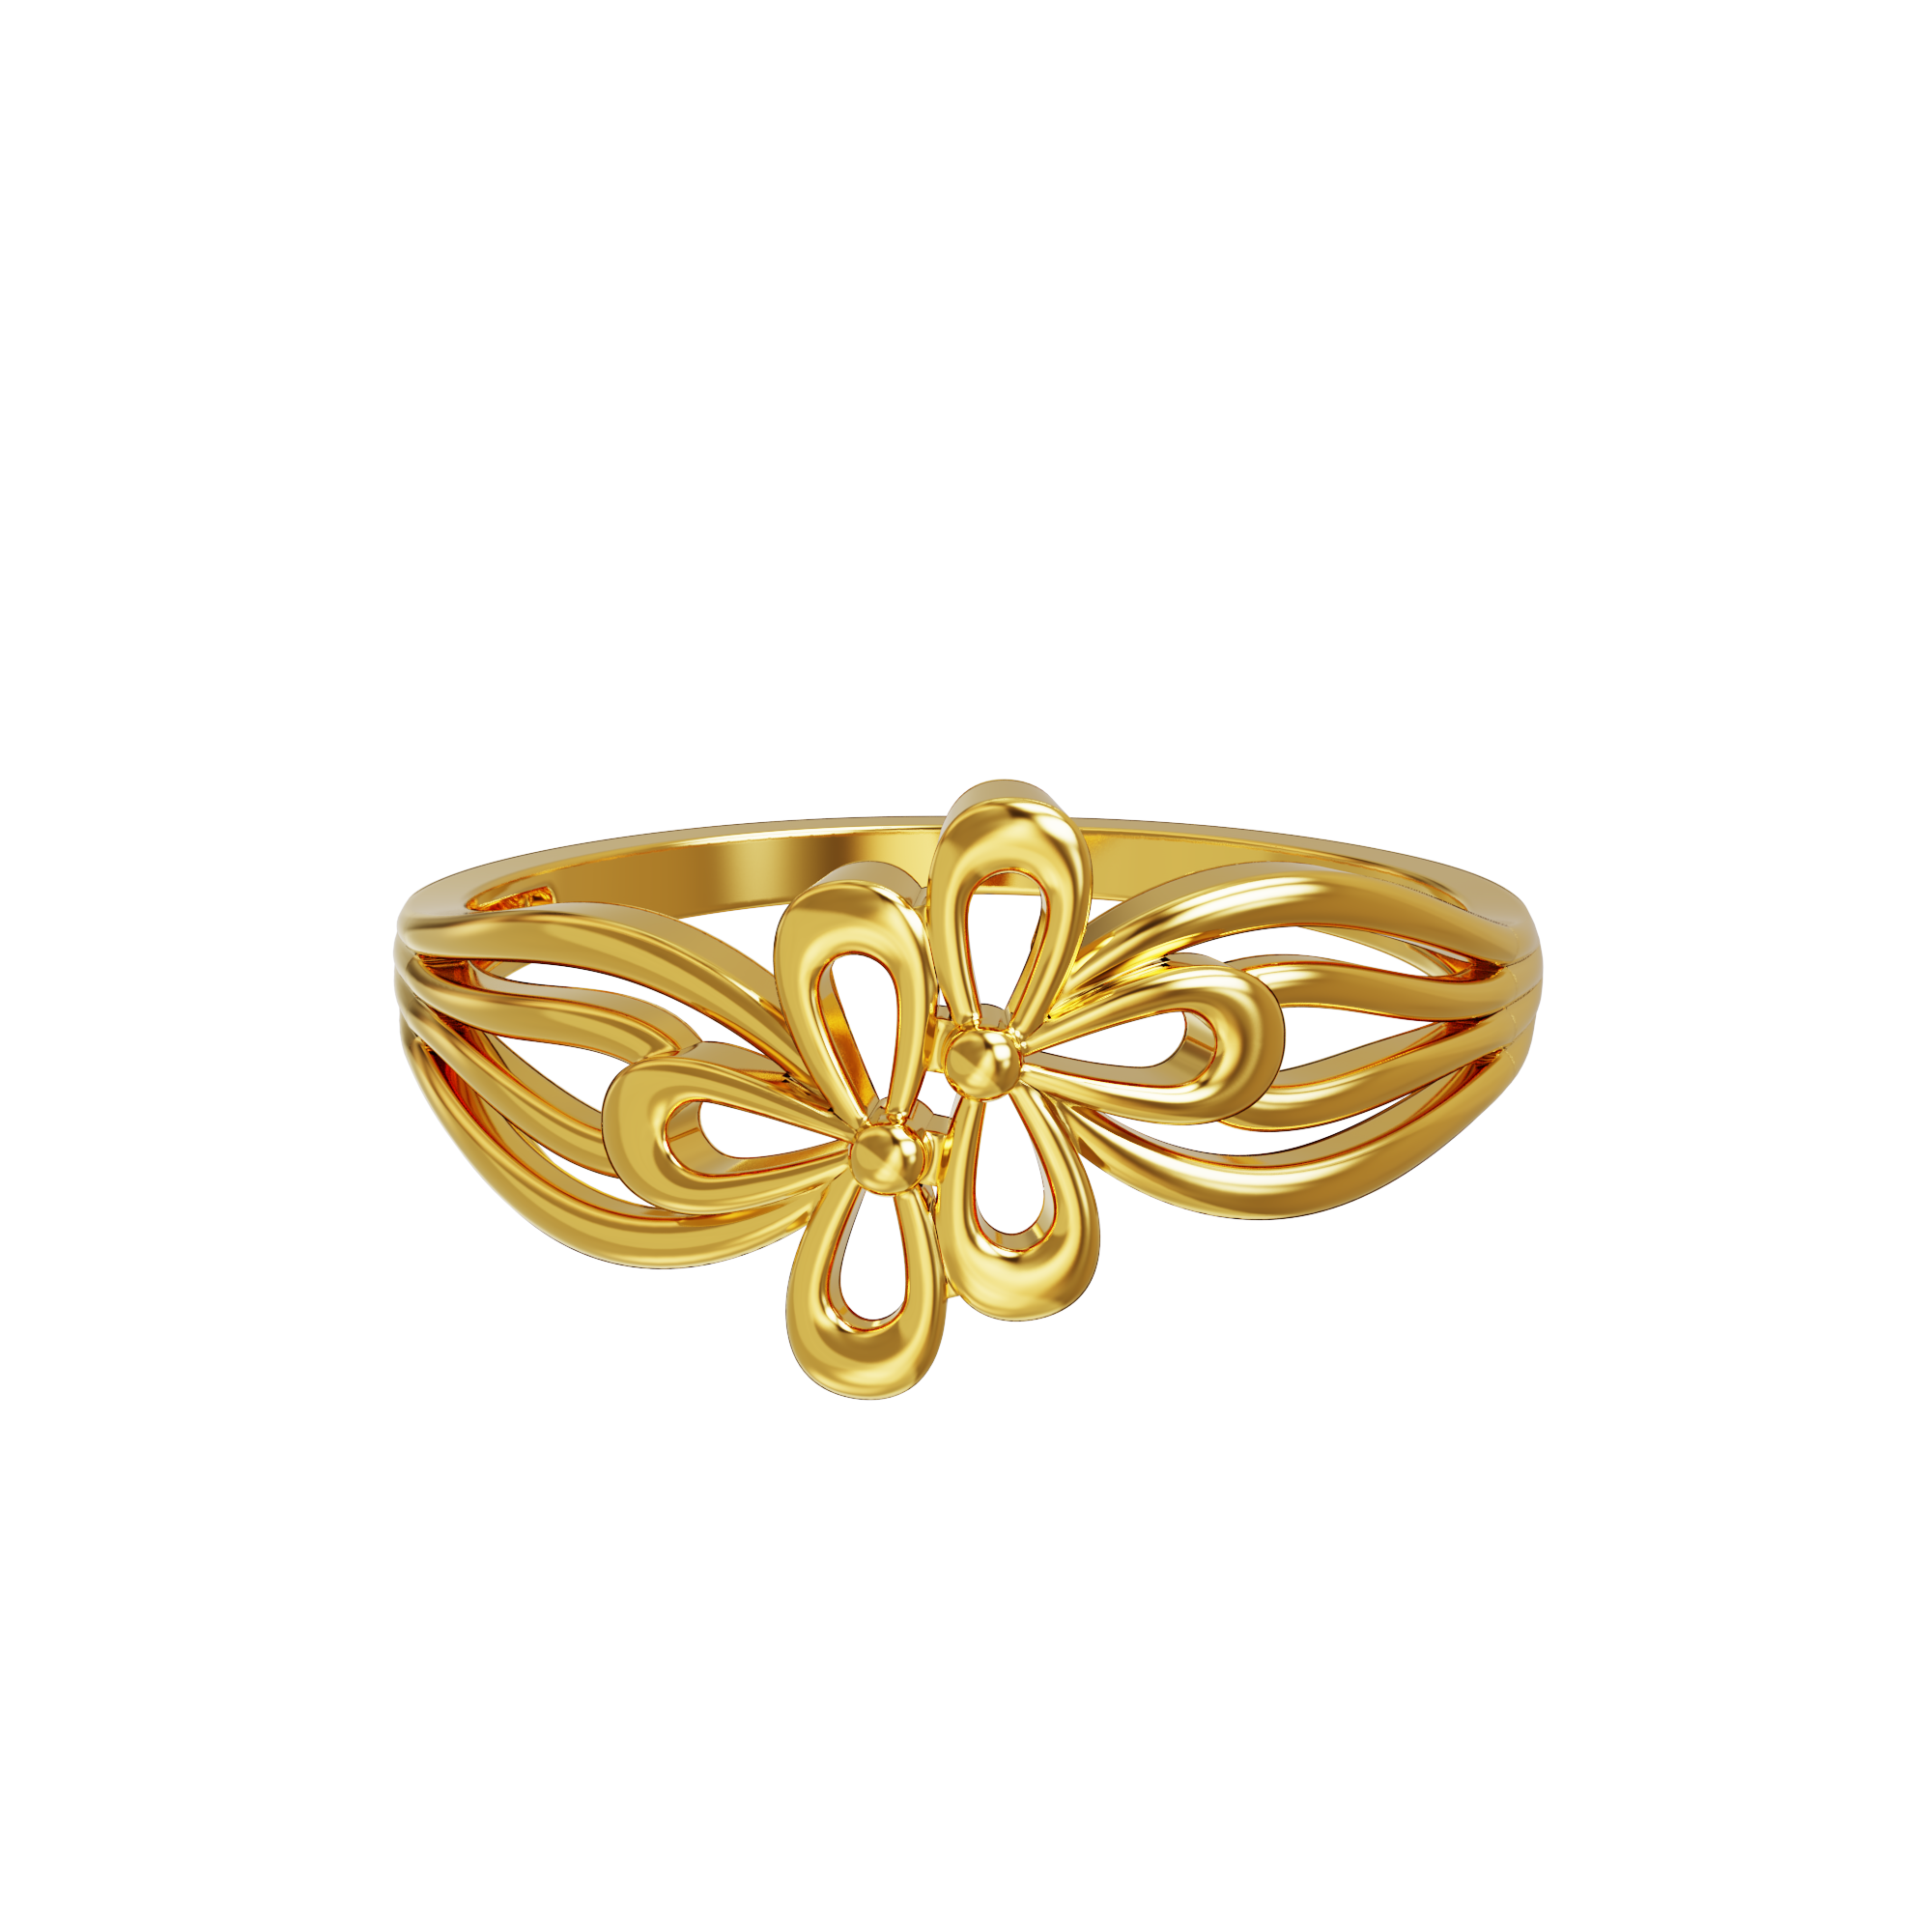 Unique Design Gold Plated Ring for Girls/Women – Meerzah